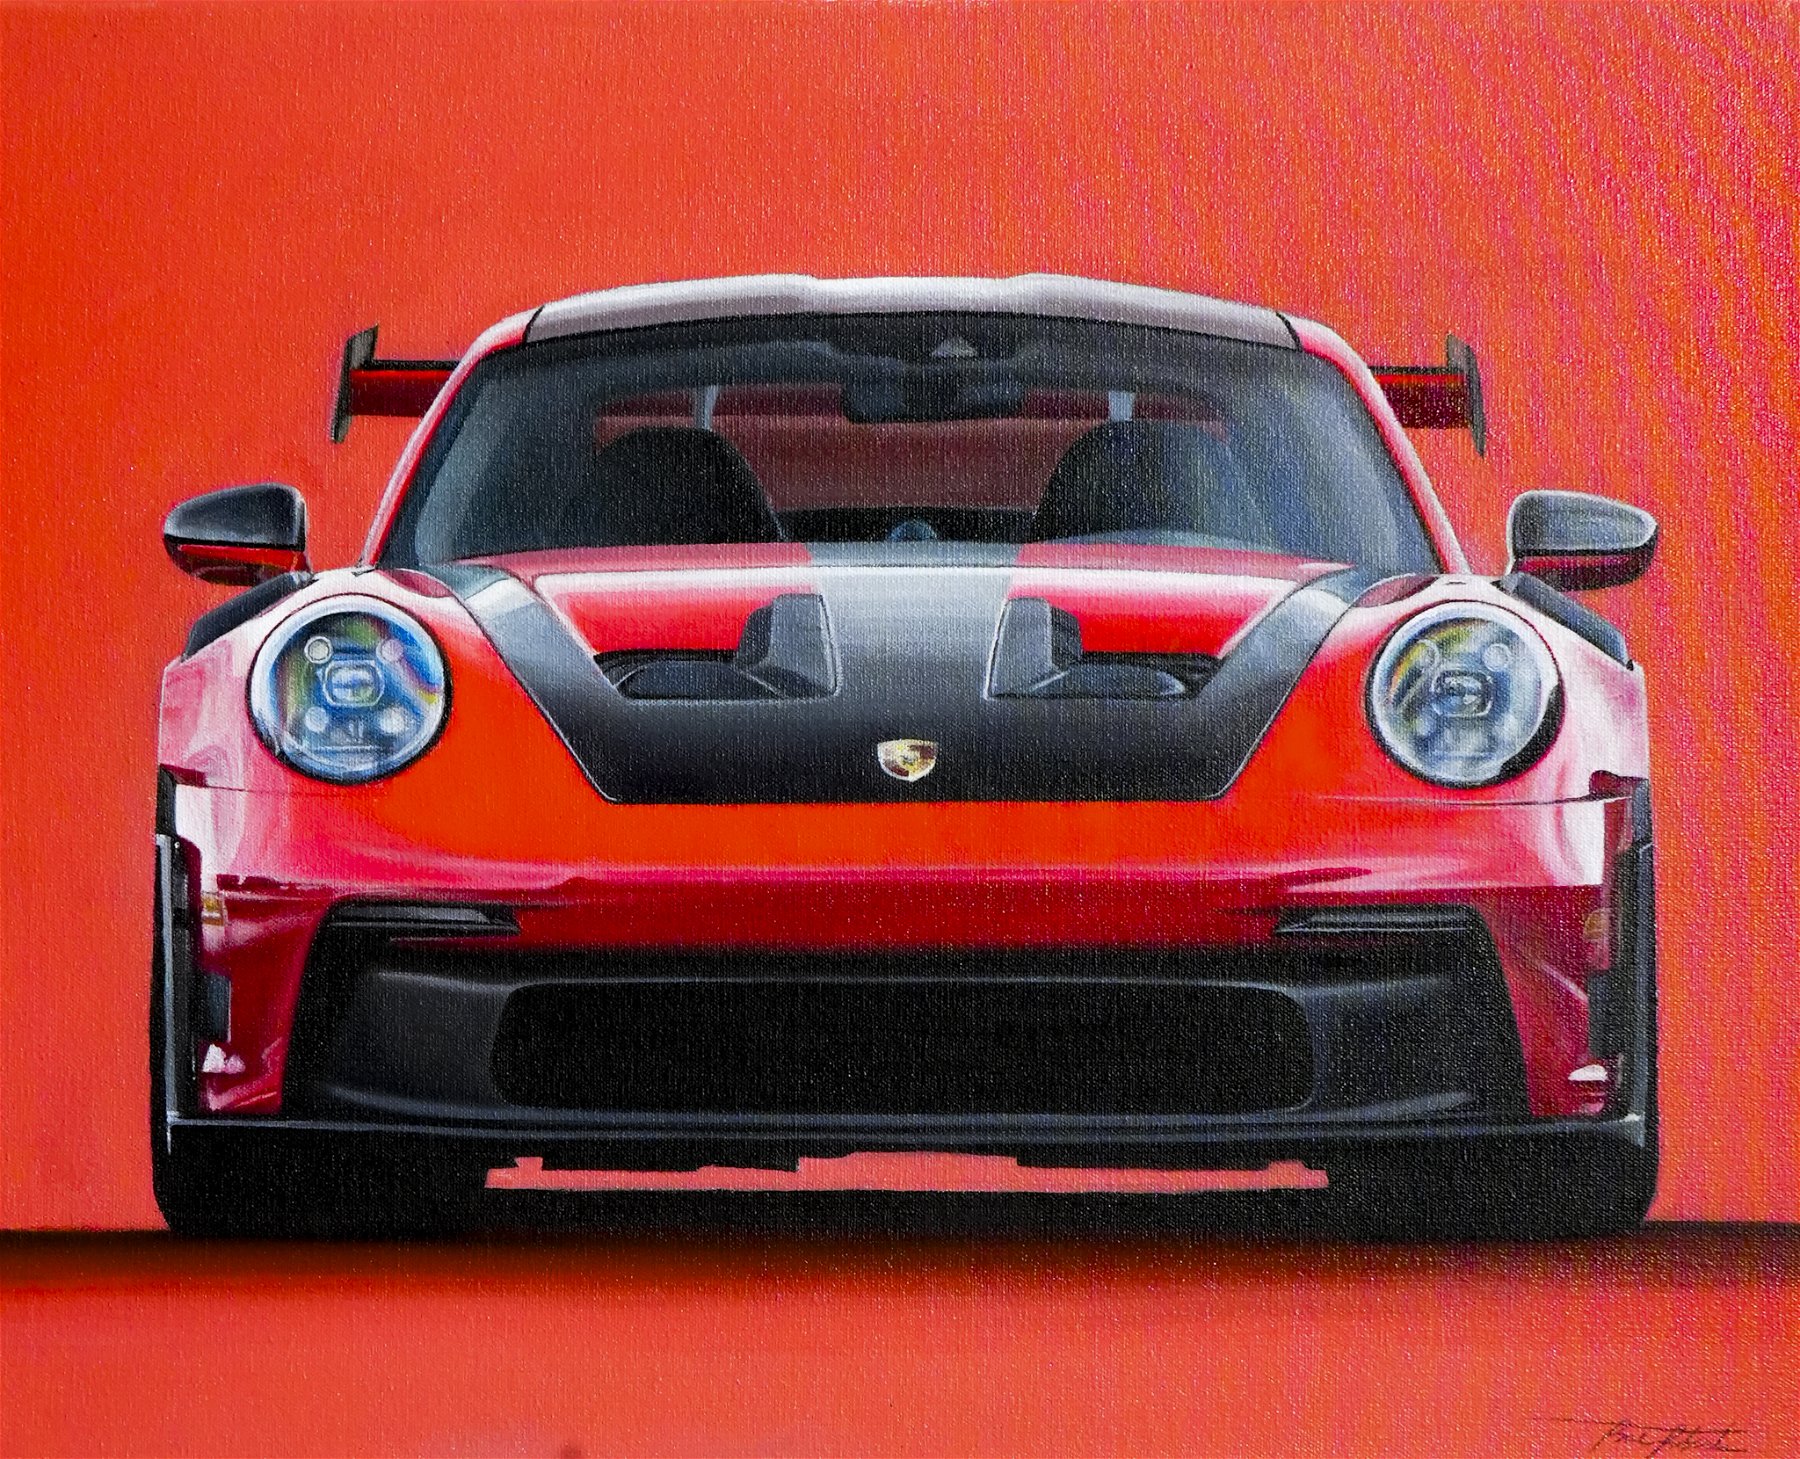 A painted Porsche 911 GT3 RS by Rae Roberts